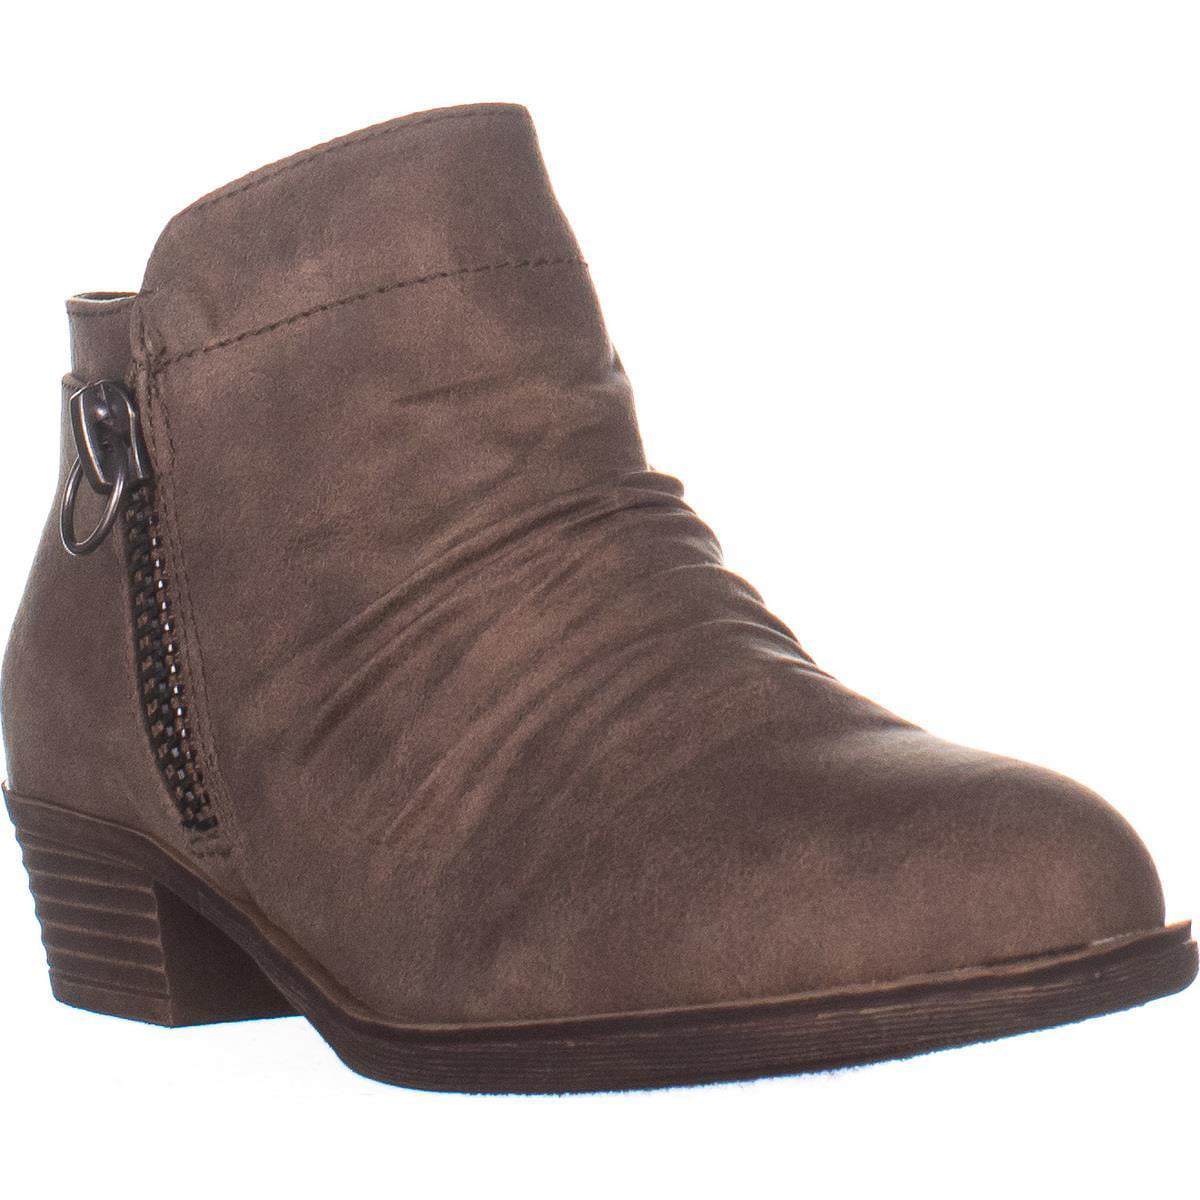 Sugar - Womens Sugar Trust Me Side Zip Ankle Boots, Taupe, 7 US ...